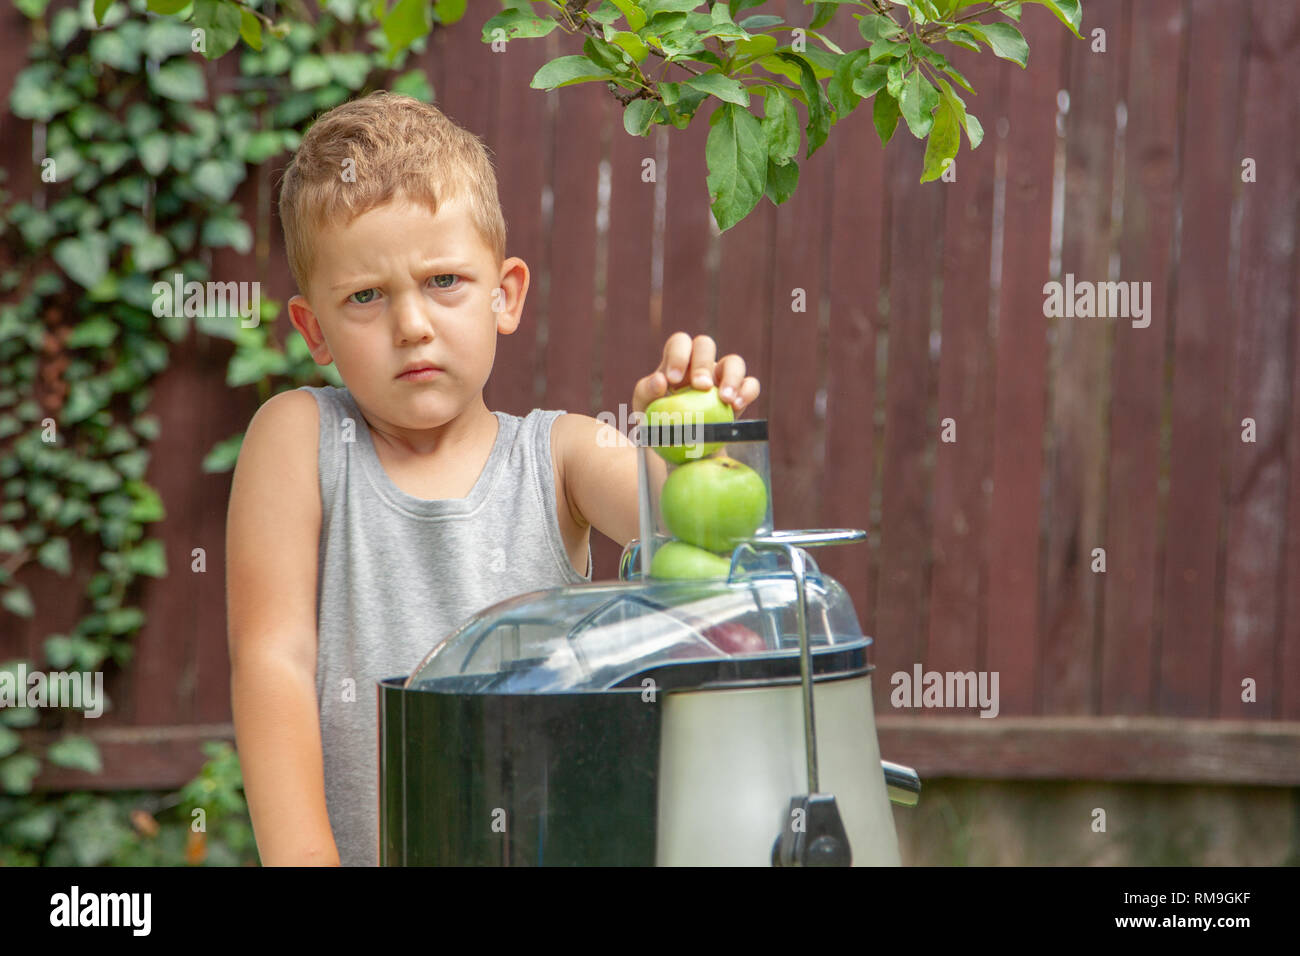 Angry child boy making juice from green apples in juicer outdoors ...